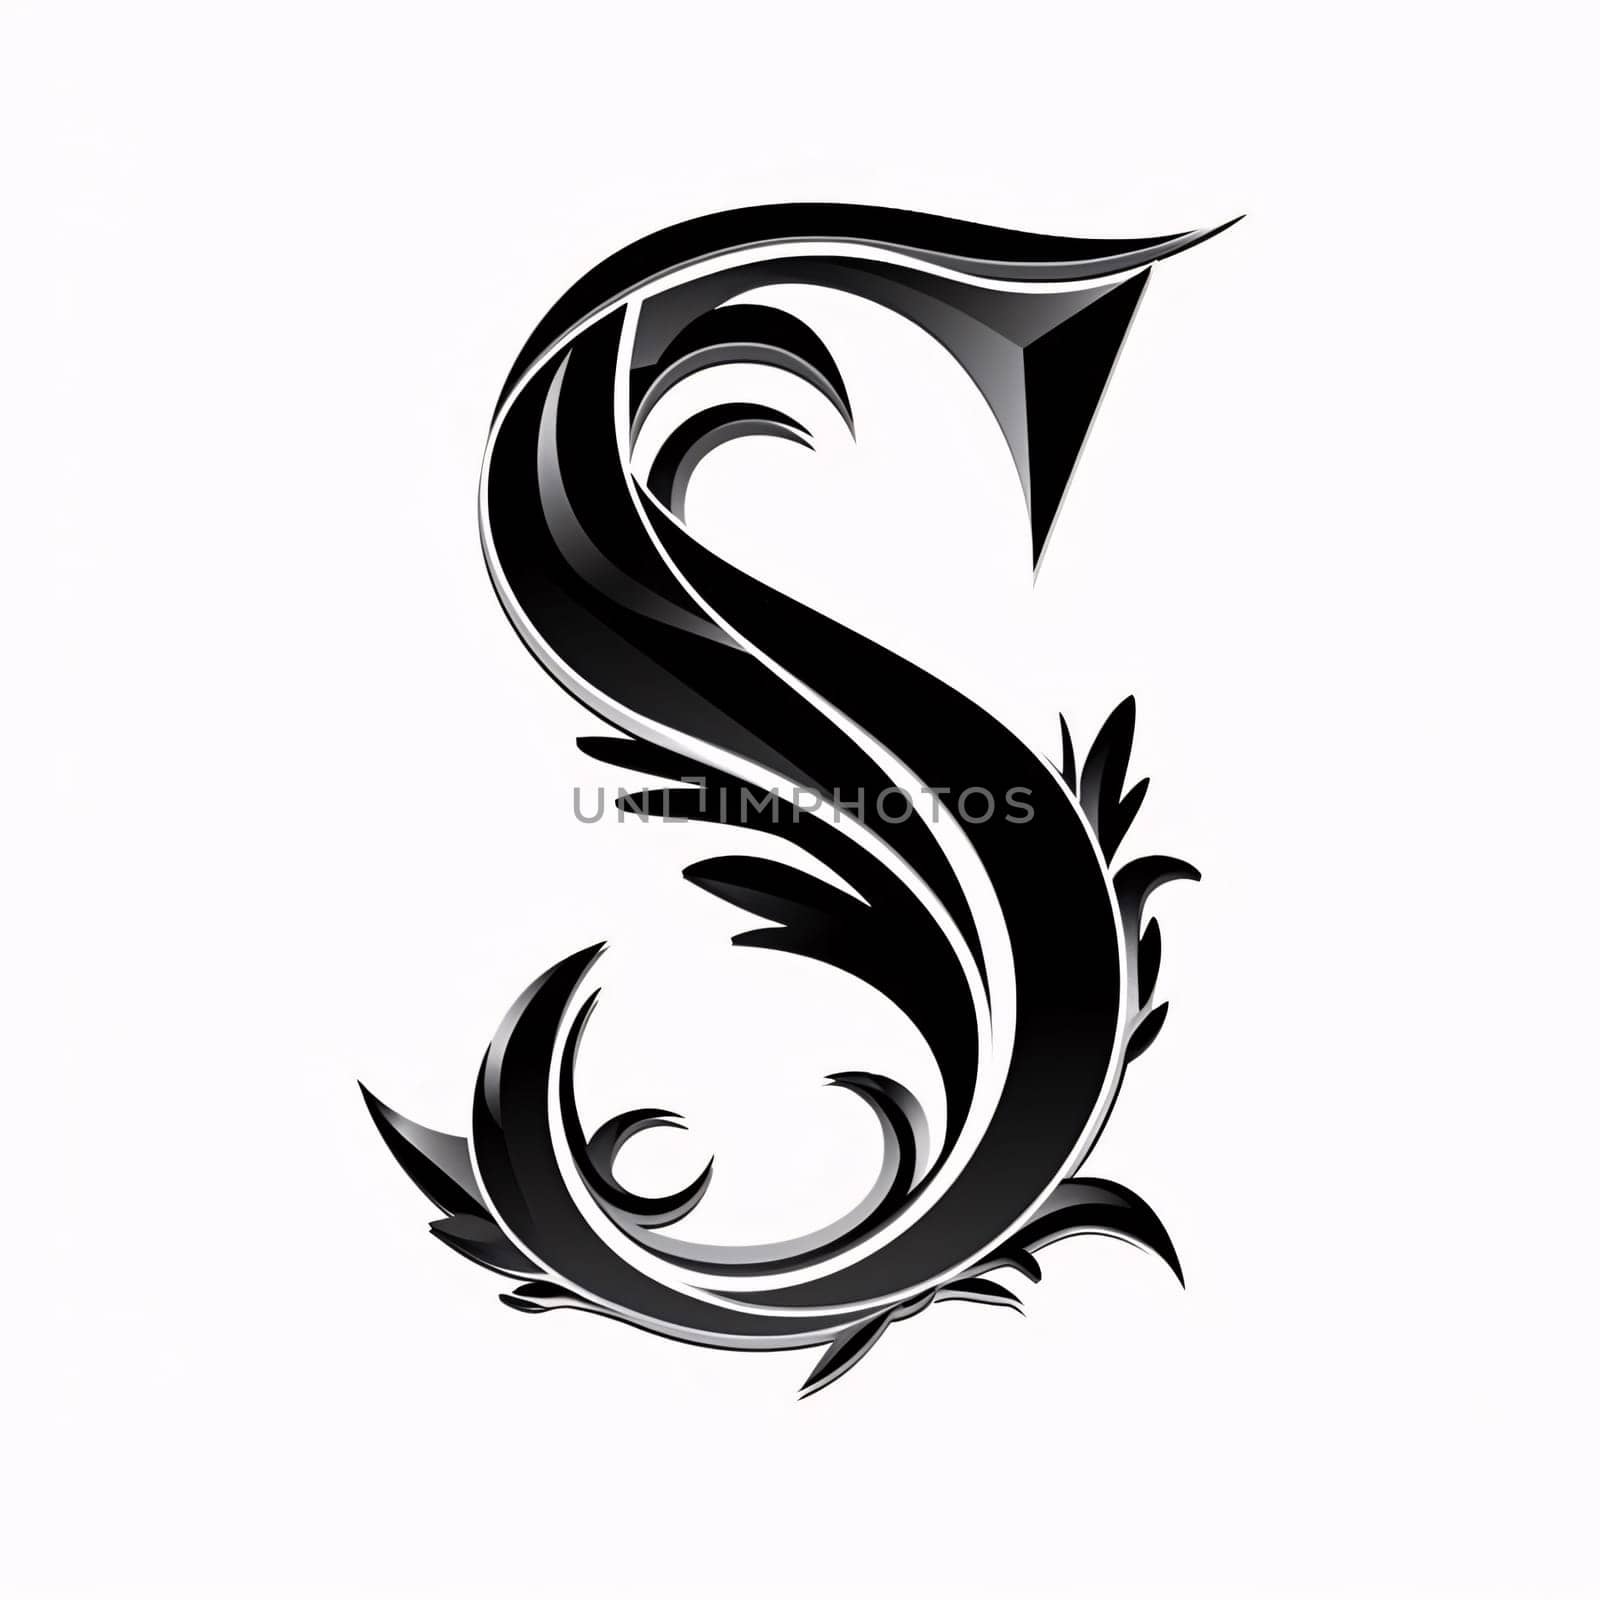 Graphic alphabet letters: decorative letter S in black and silver colors on a white background